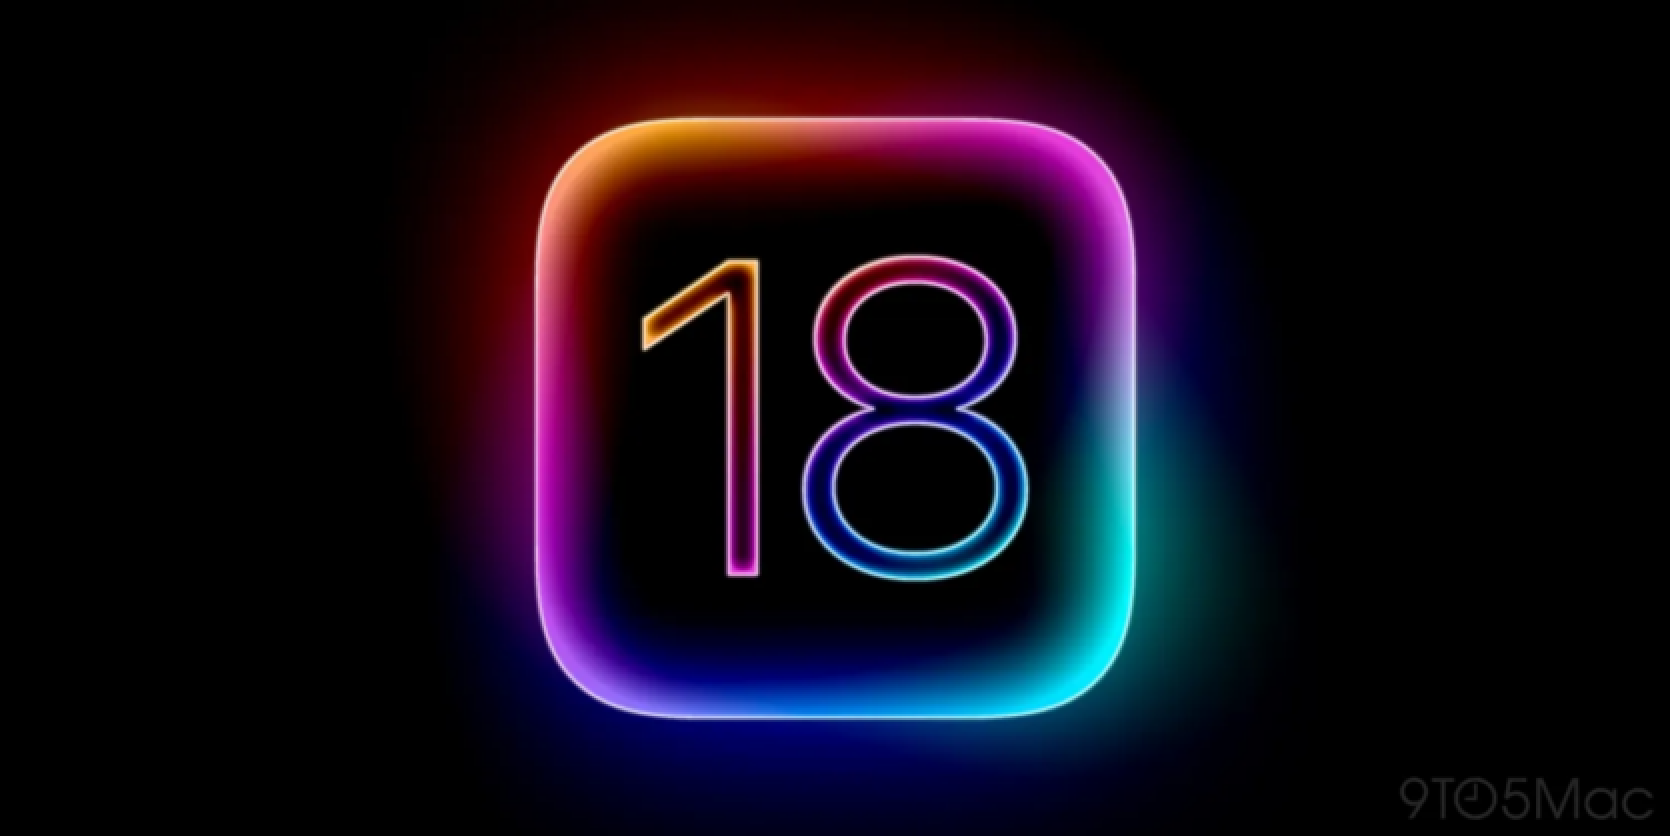 iOS 18 with artificial intelligence and a new home screen - what to expect from the "biggest update" in iPhone history